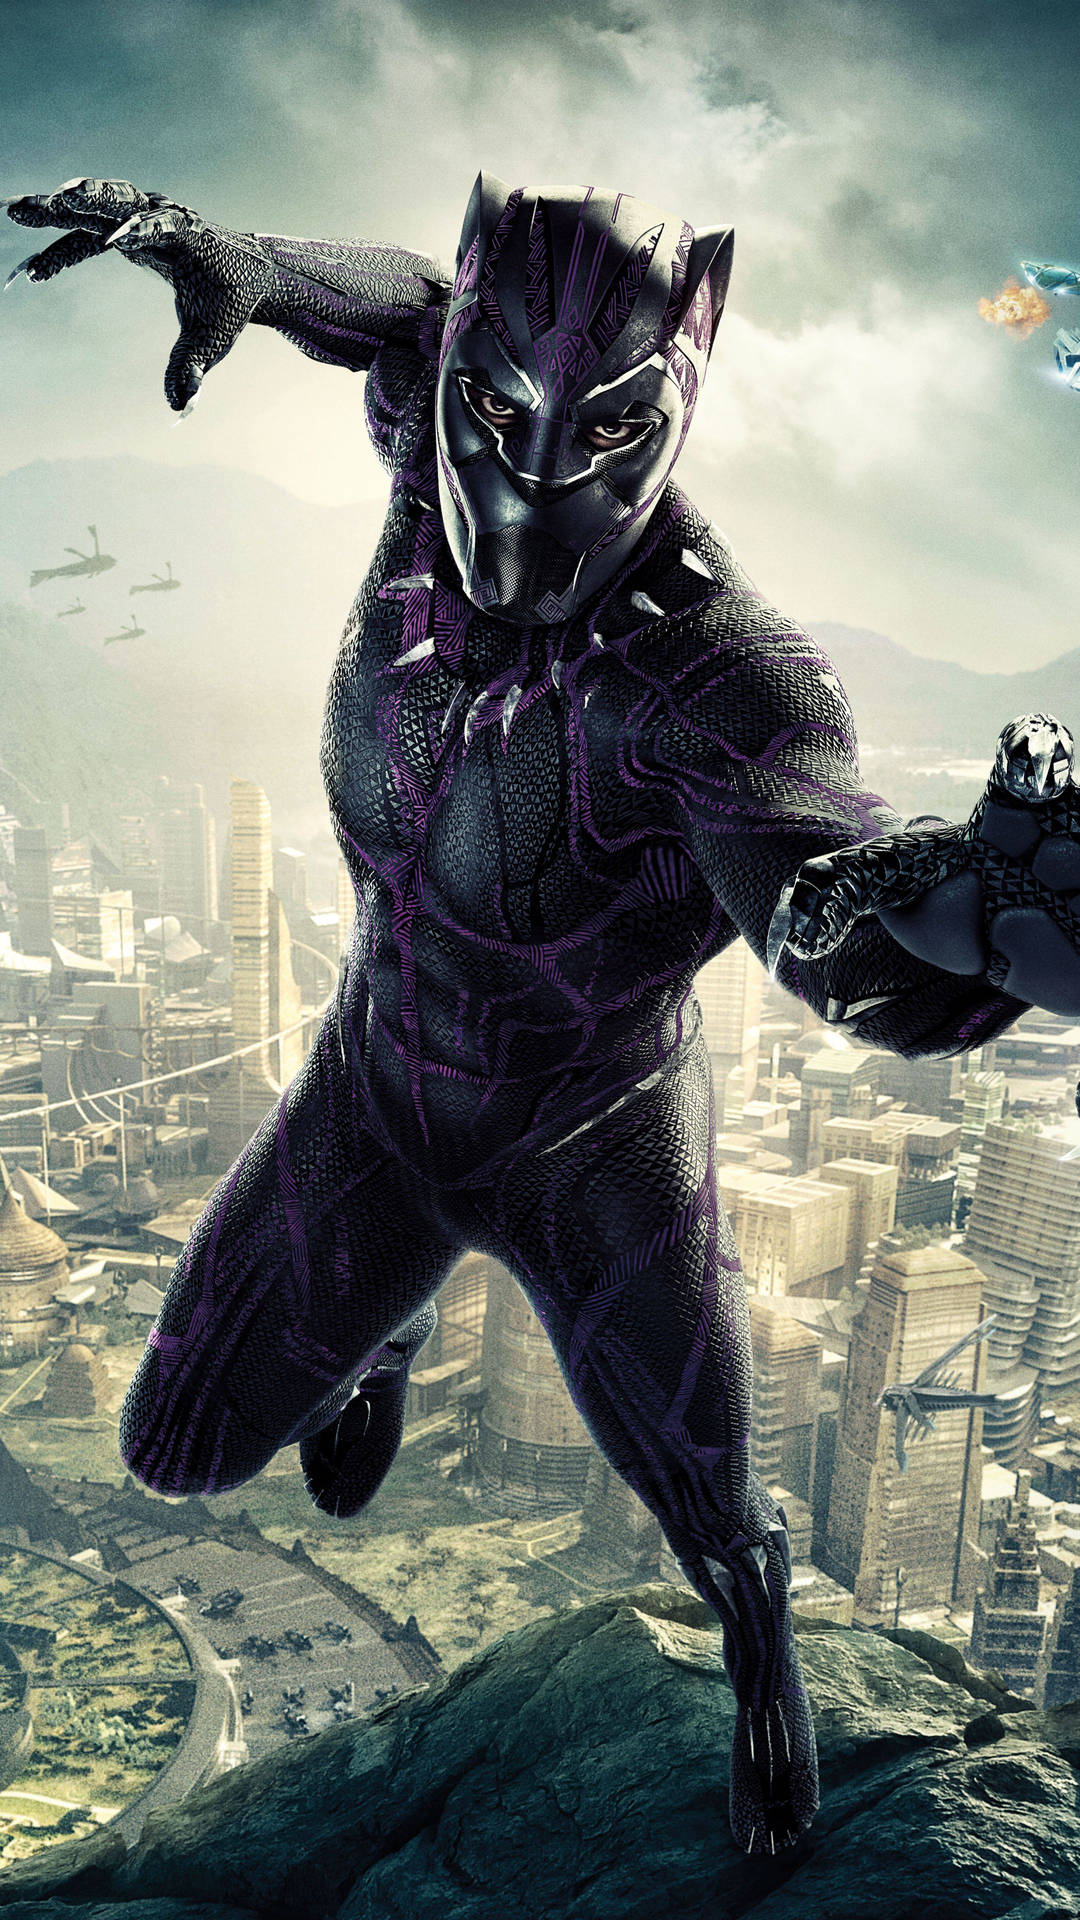 Black Panther is ready to take on the world. Wallpaper